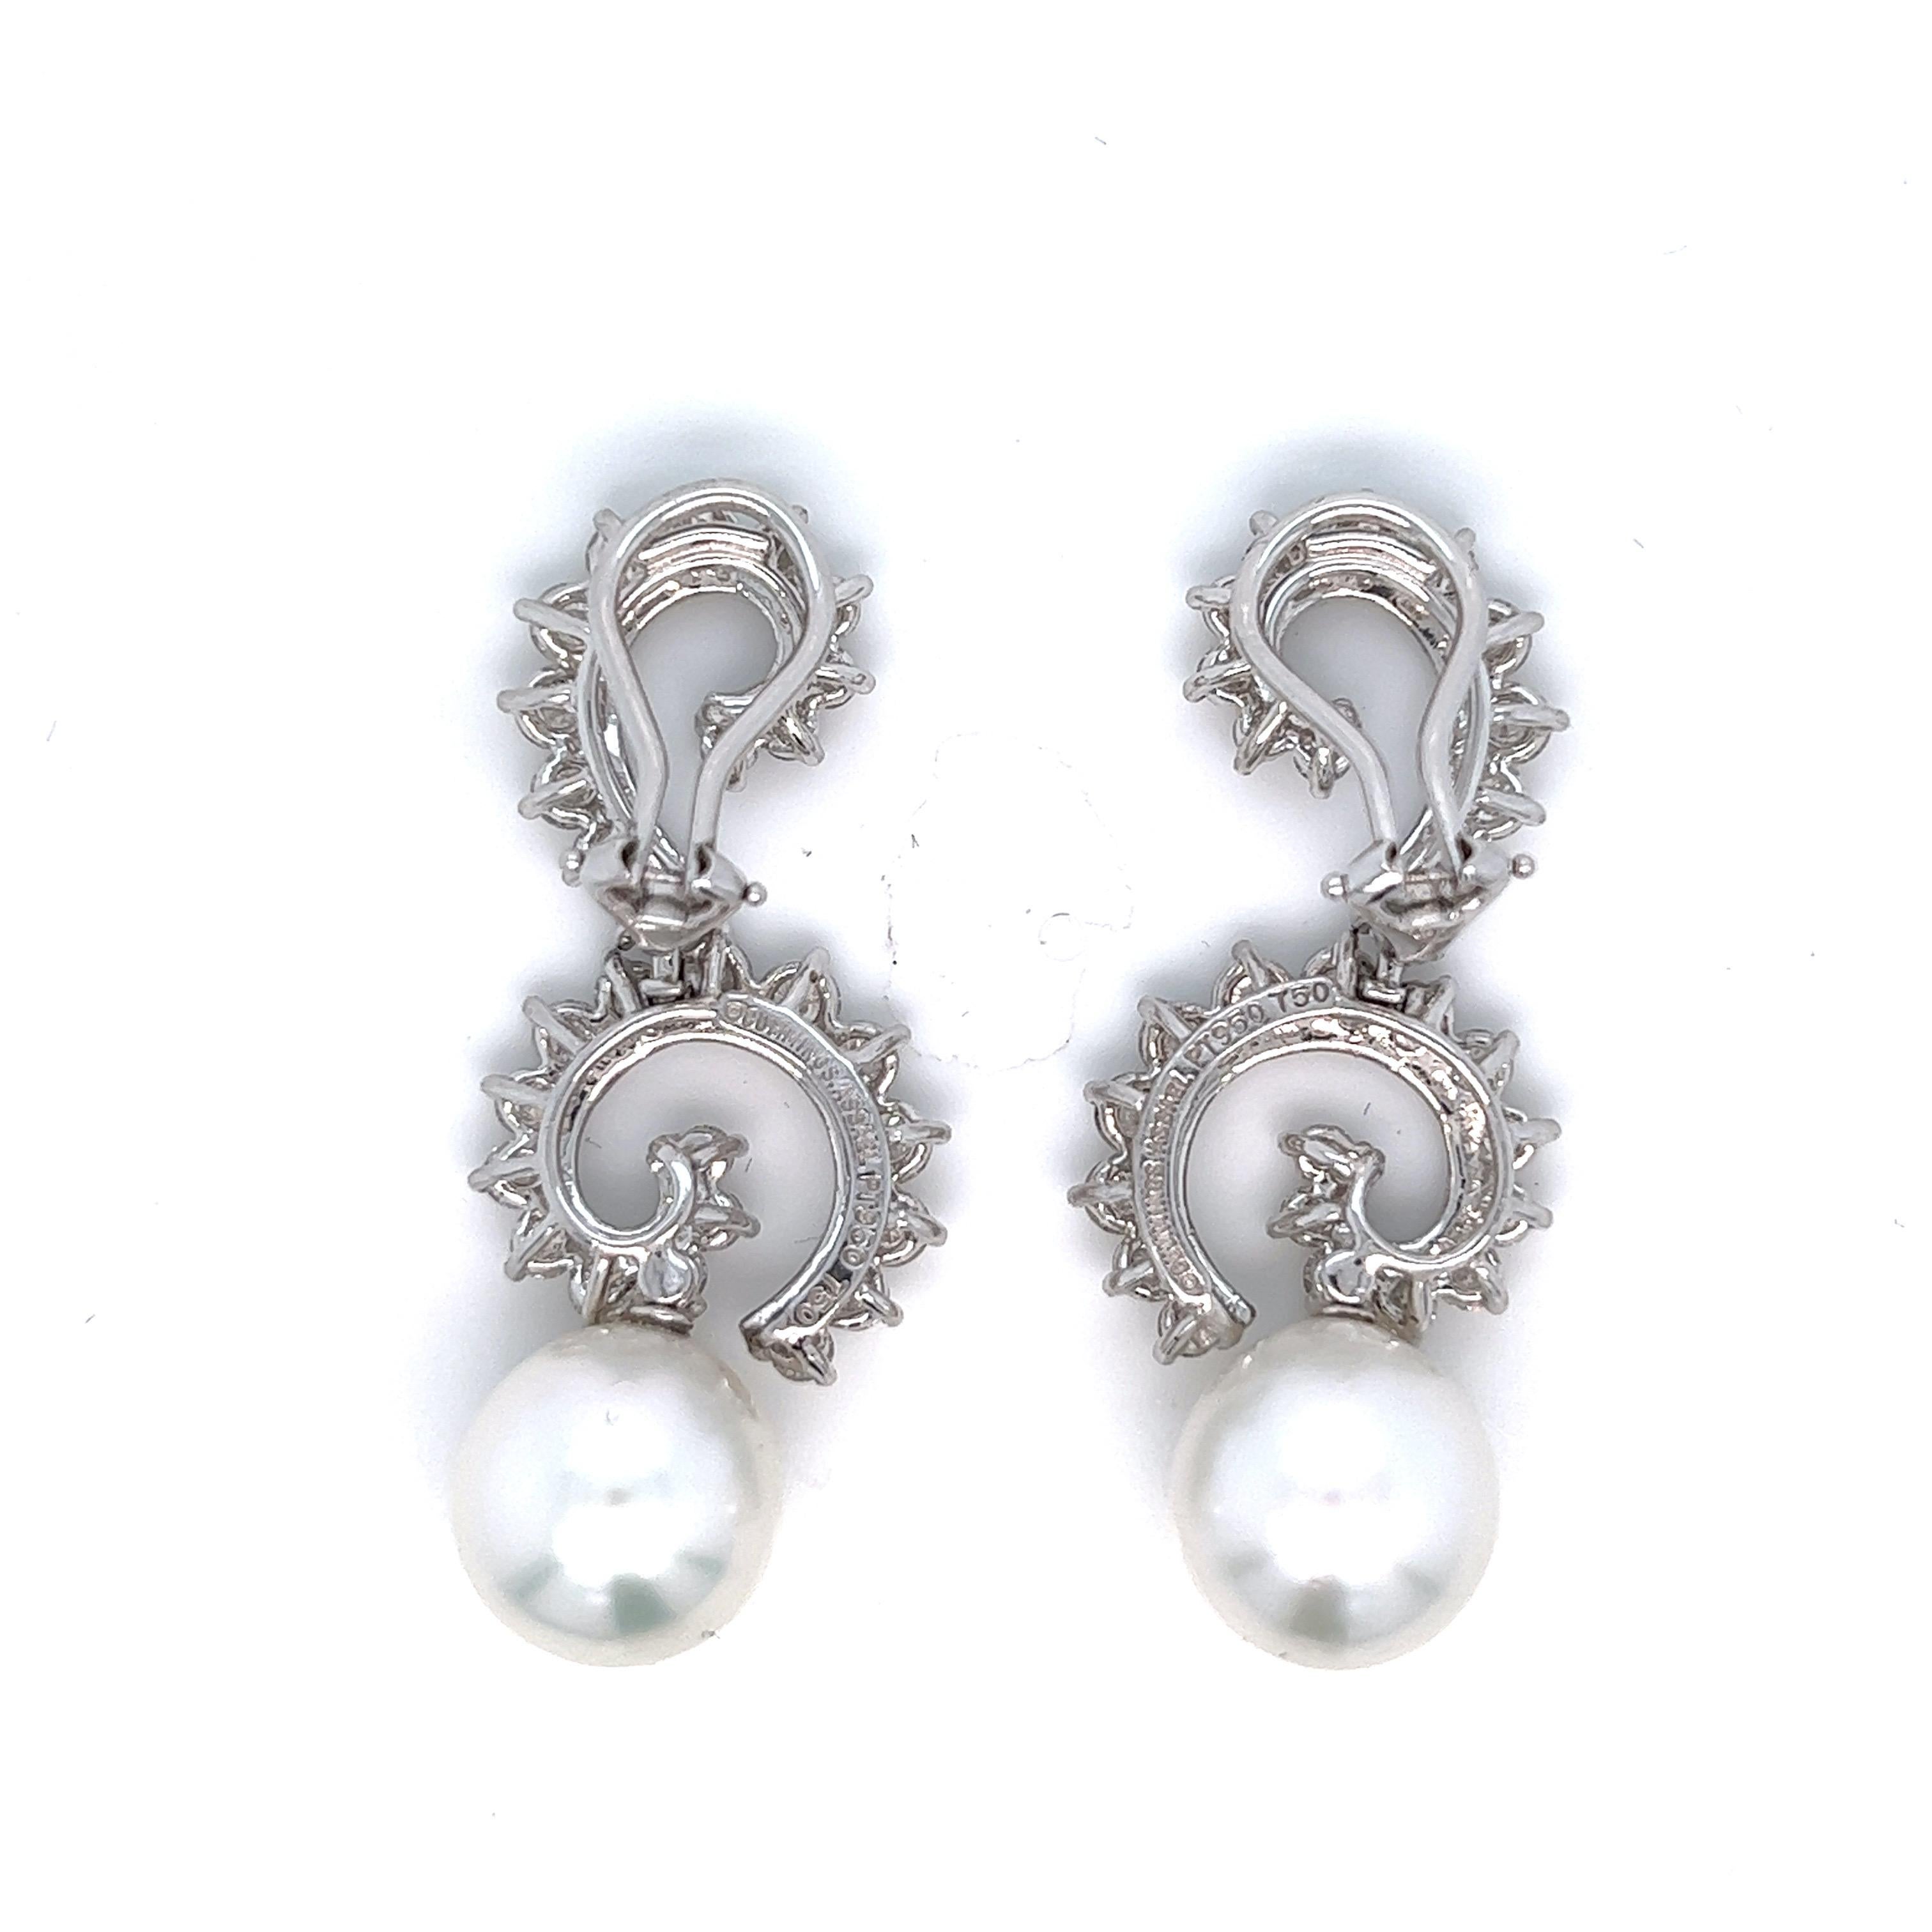 Angela Cummings for Assael diamond pearl drop ear clips

Round-cut diamonds of approximately 5 carats, south sea pearls (12 mm), platinum and 18 karat white gold; marked Cummings, Assael, Plat, 750

Size: width 0.75 inch, length 1.88 inch
Total